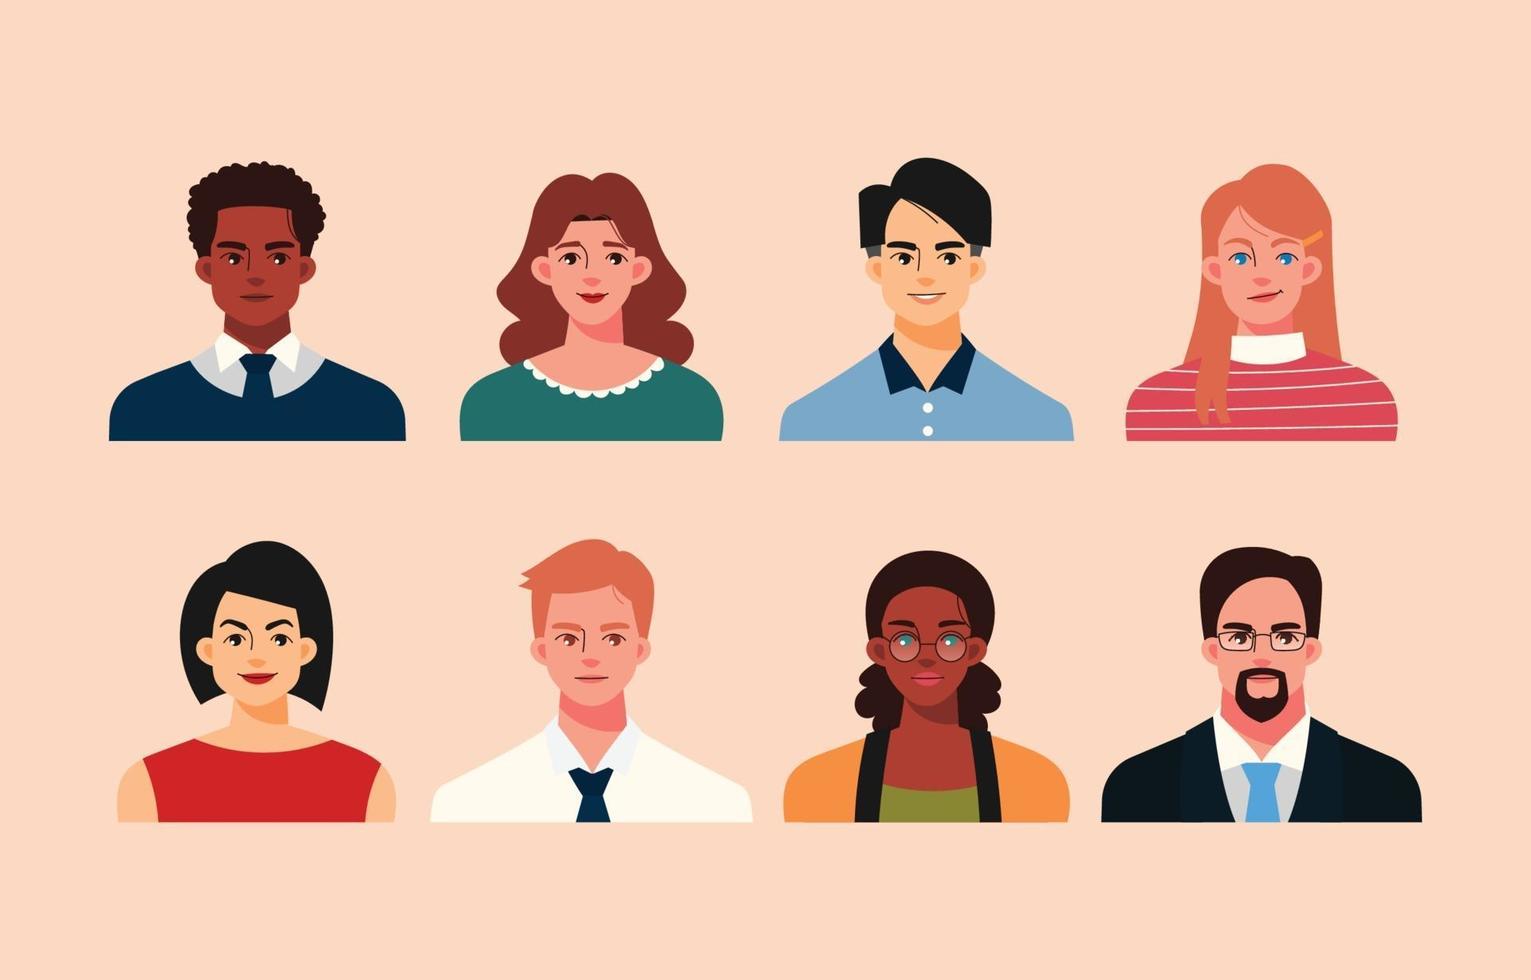 Business People Avatar Set in Flat Style vector